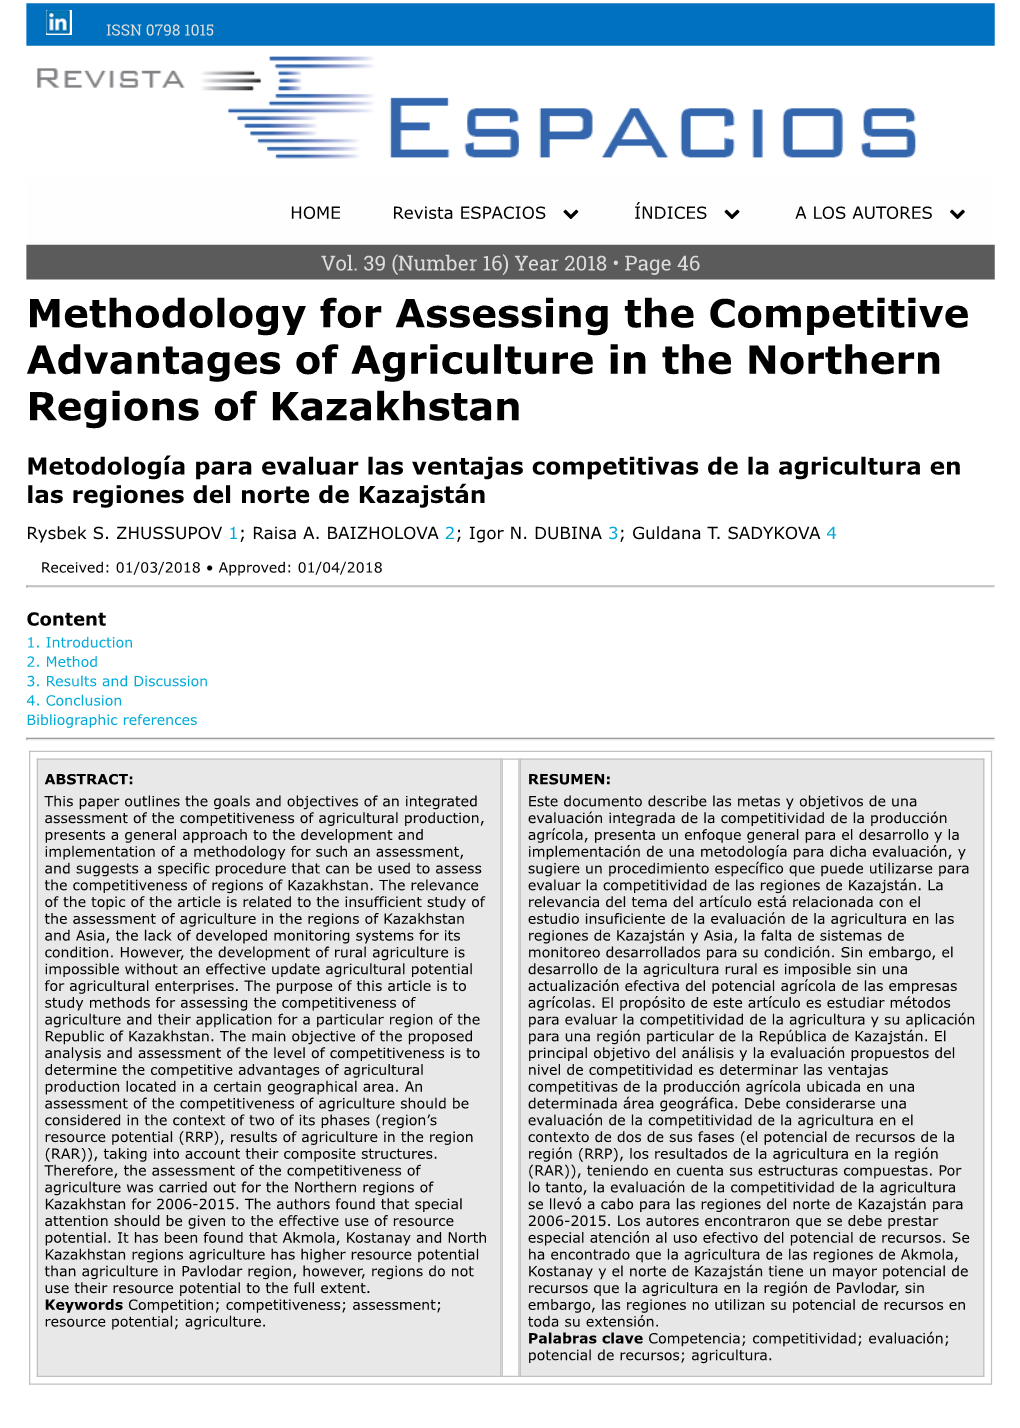 Methodology for Assessing the Competitive Advantages of Agriculture in the Northern Regions of Kazakhstan